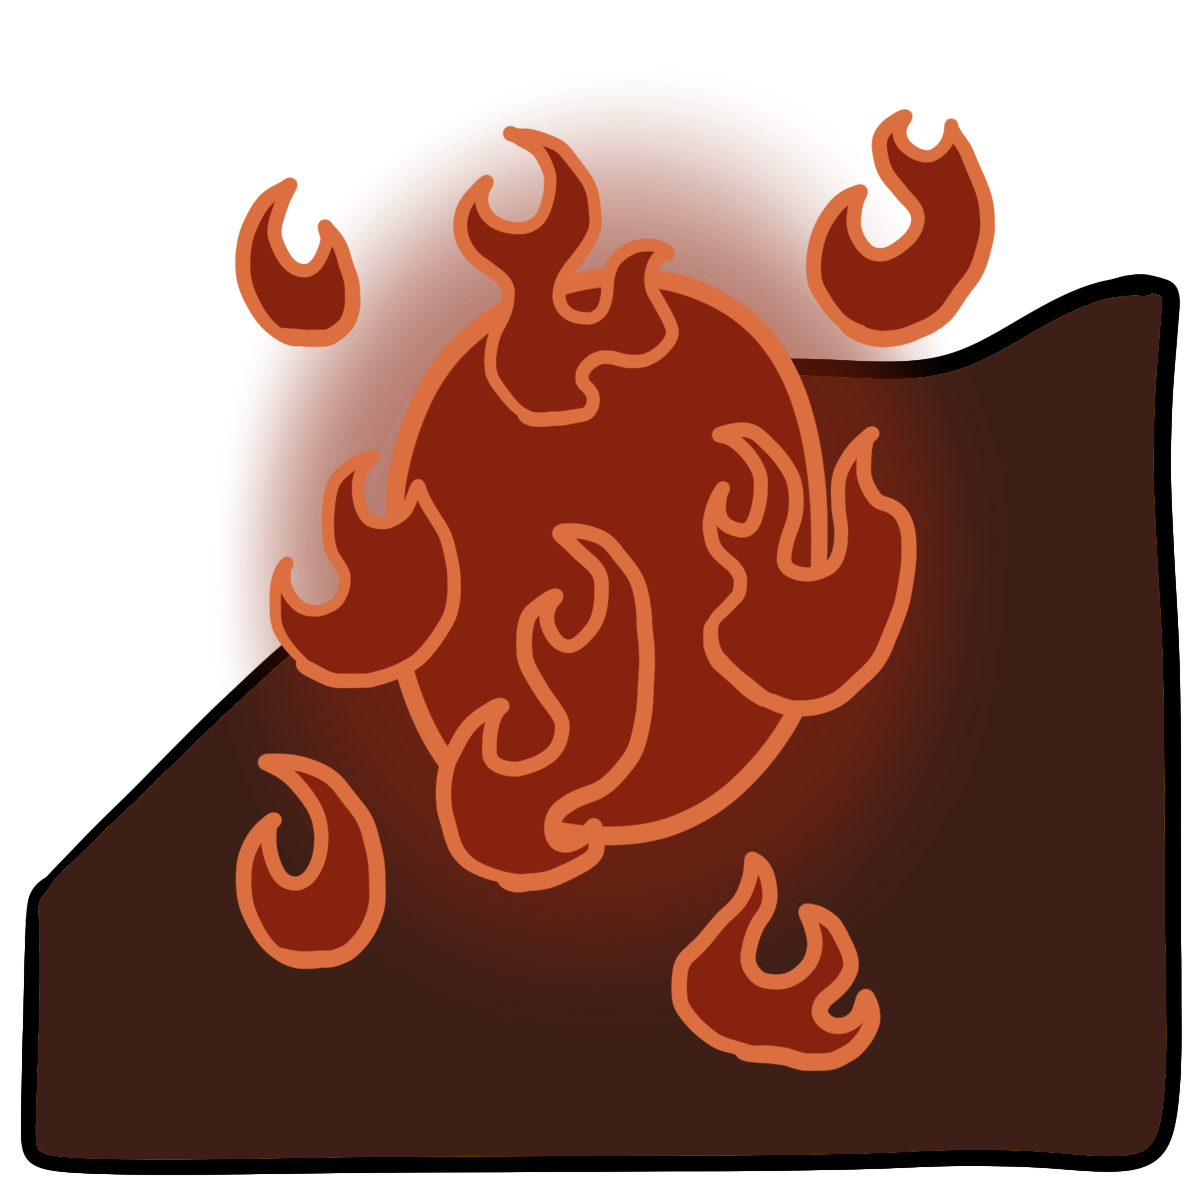 Orange-red oval with flames around it. Curved dark brown skin fills the bottom half of the background.